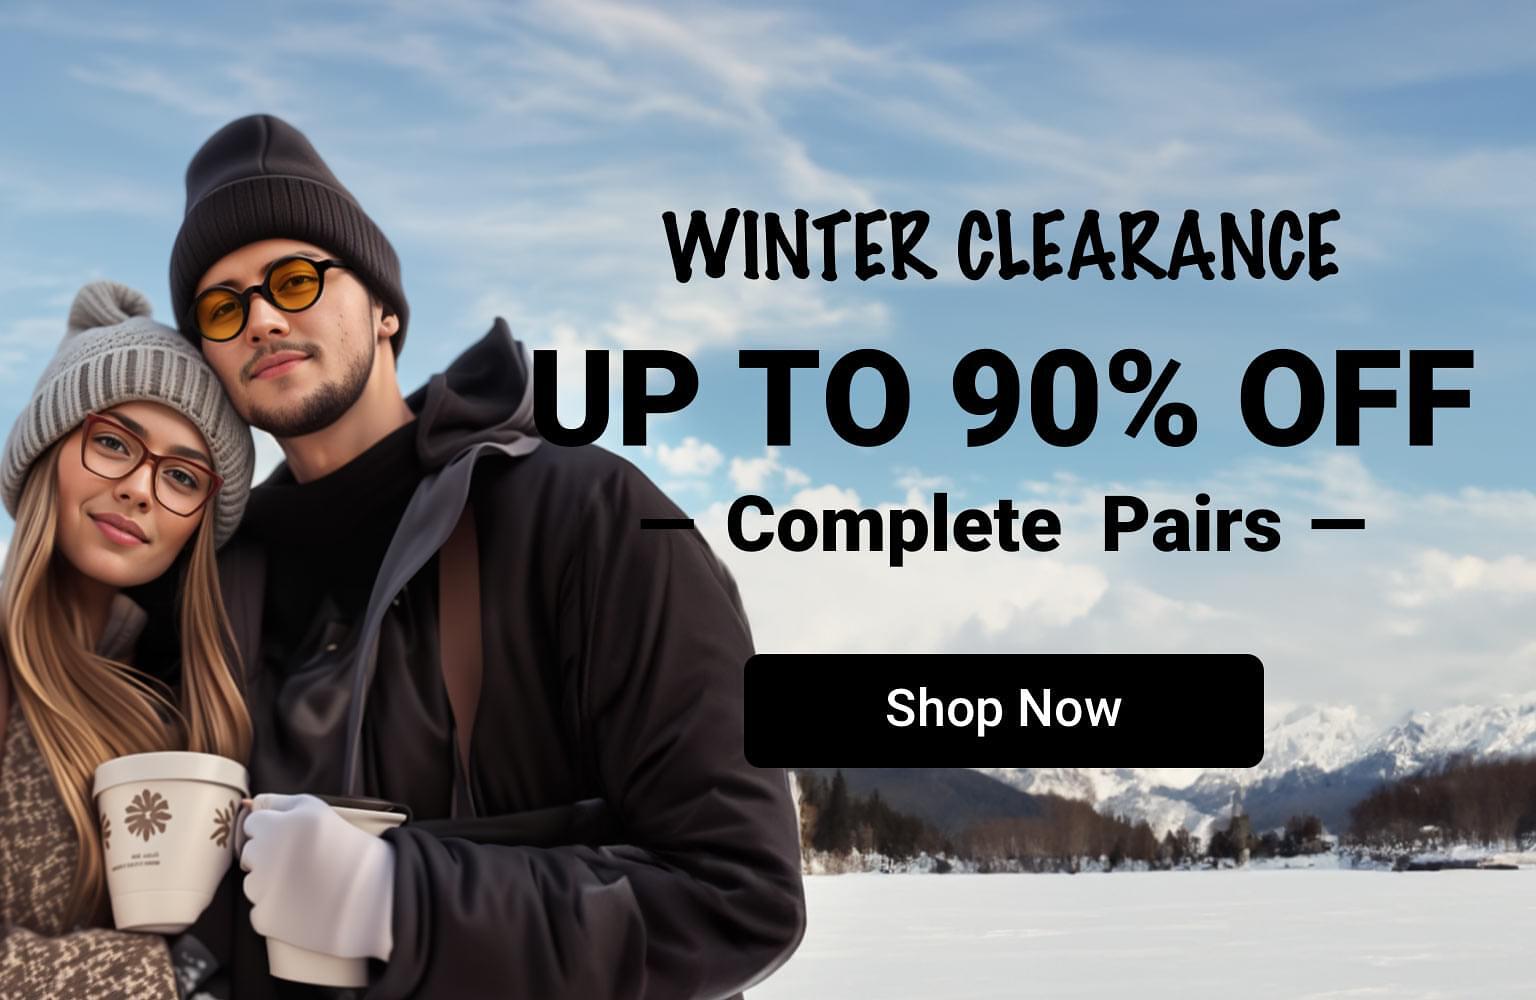 Winter Clearance Sale: Up to 90% Off